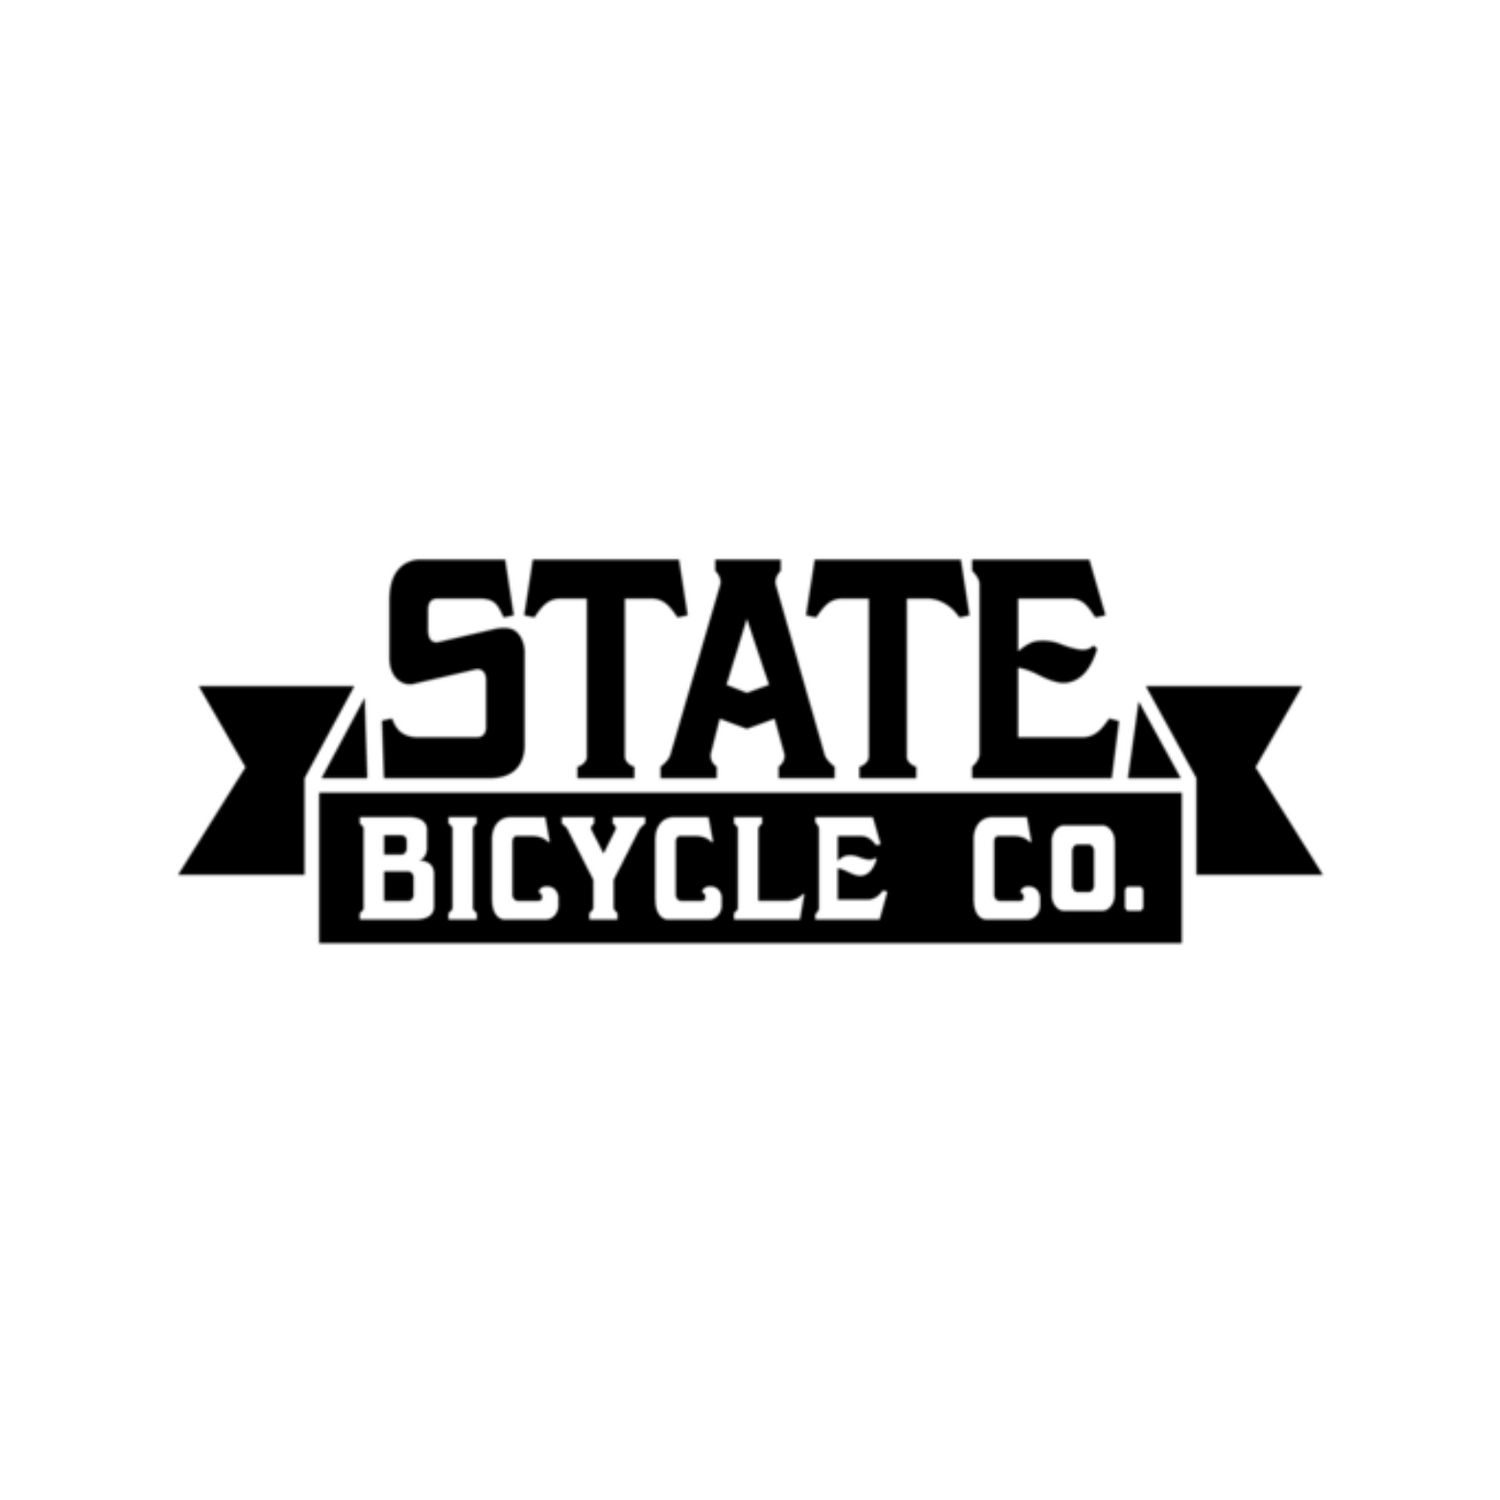 STATE BICYCLE CO.